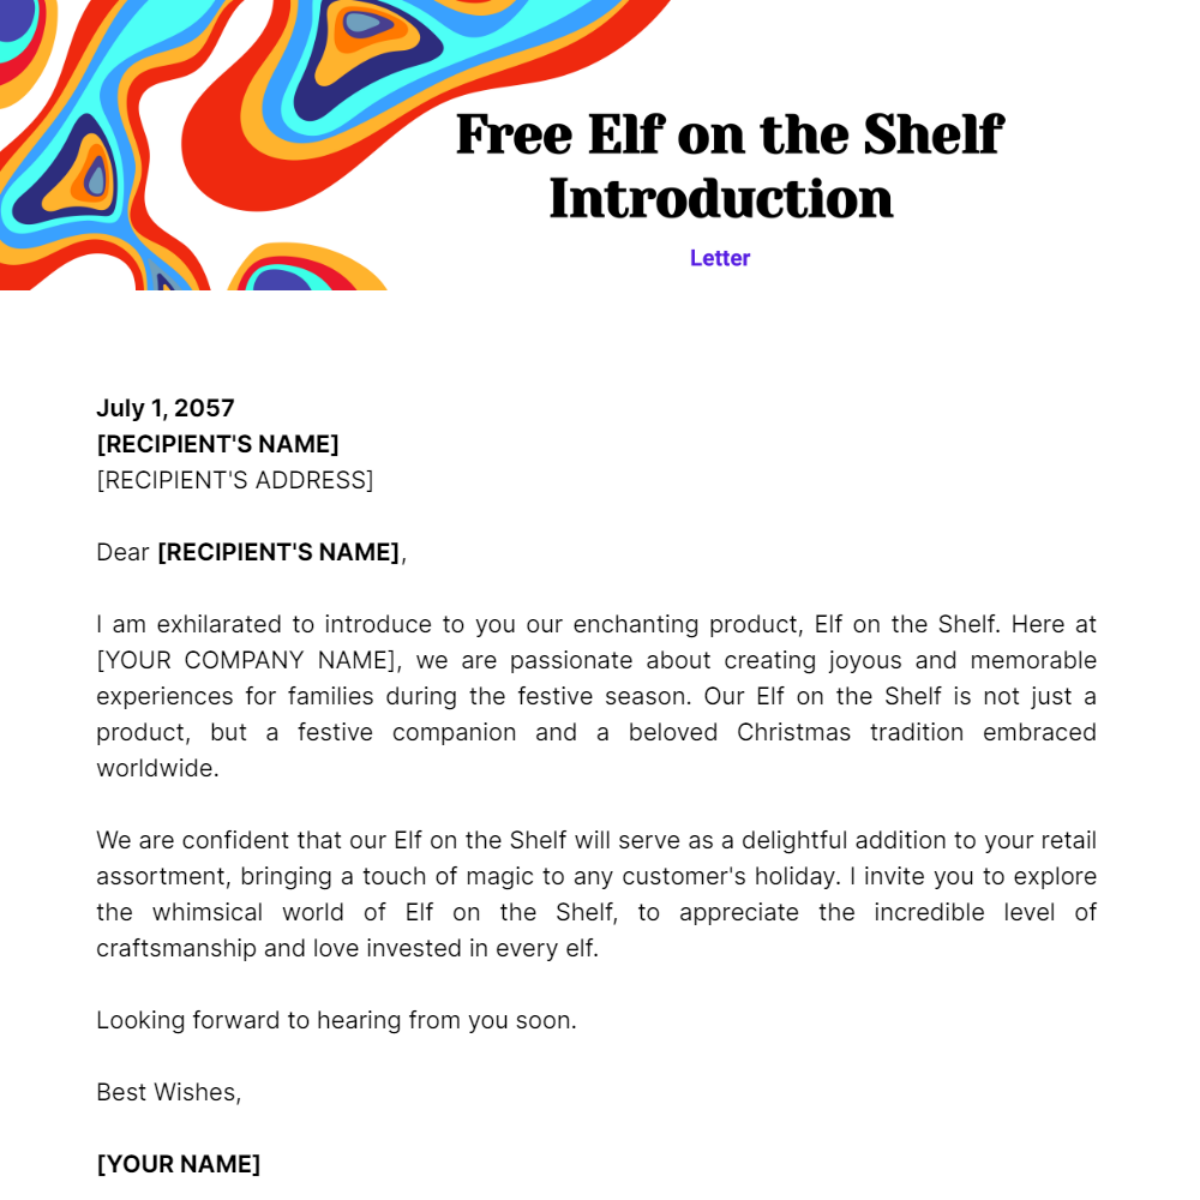 Elf on the Shelf Introduction Letter Template